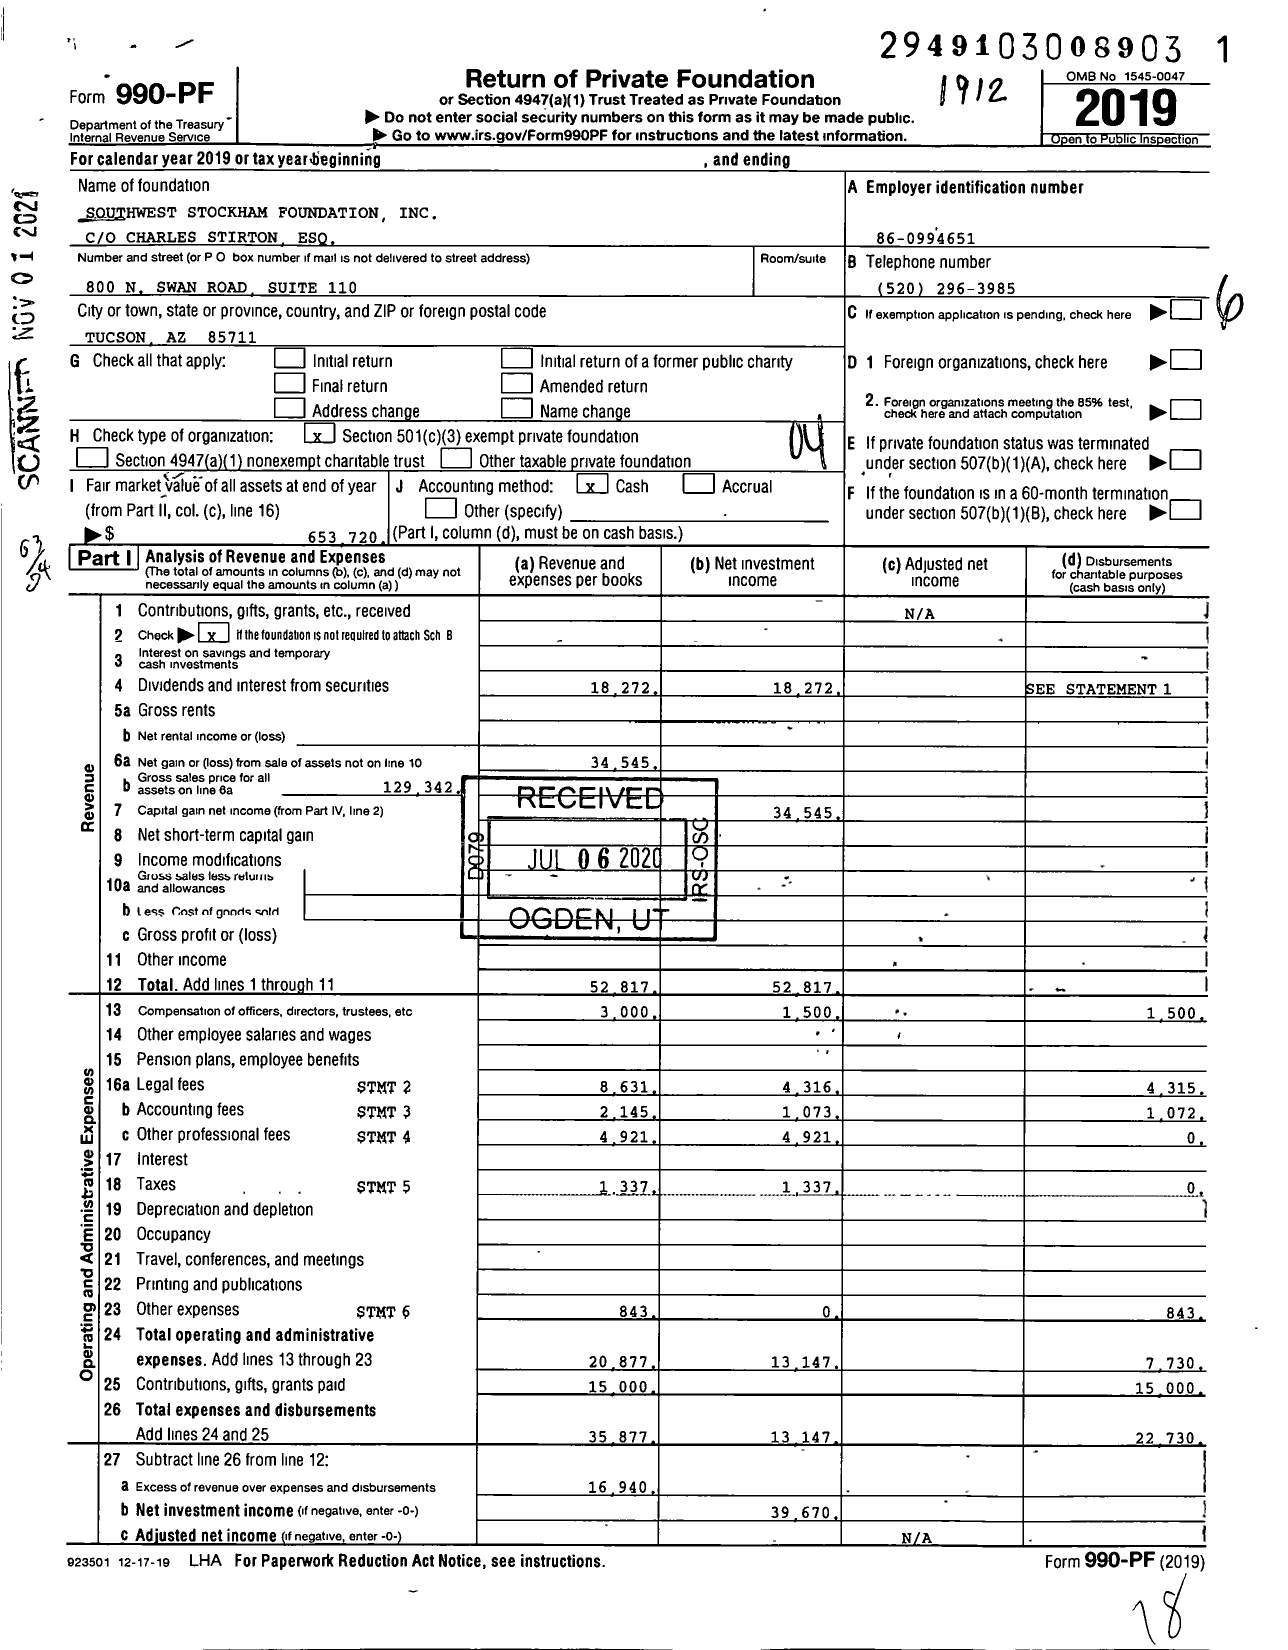 Image of first page of 2019 Form 990PF for Southwest Stockham Foundation